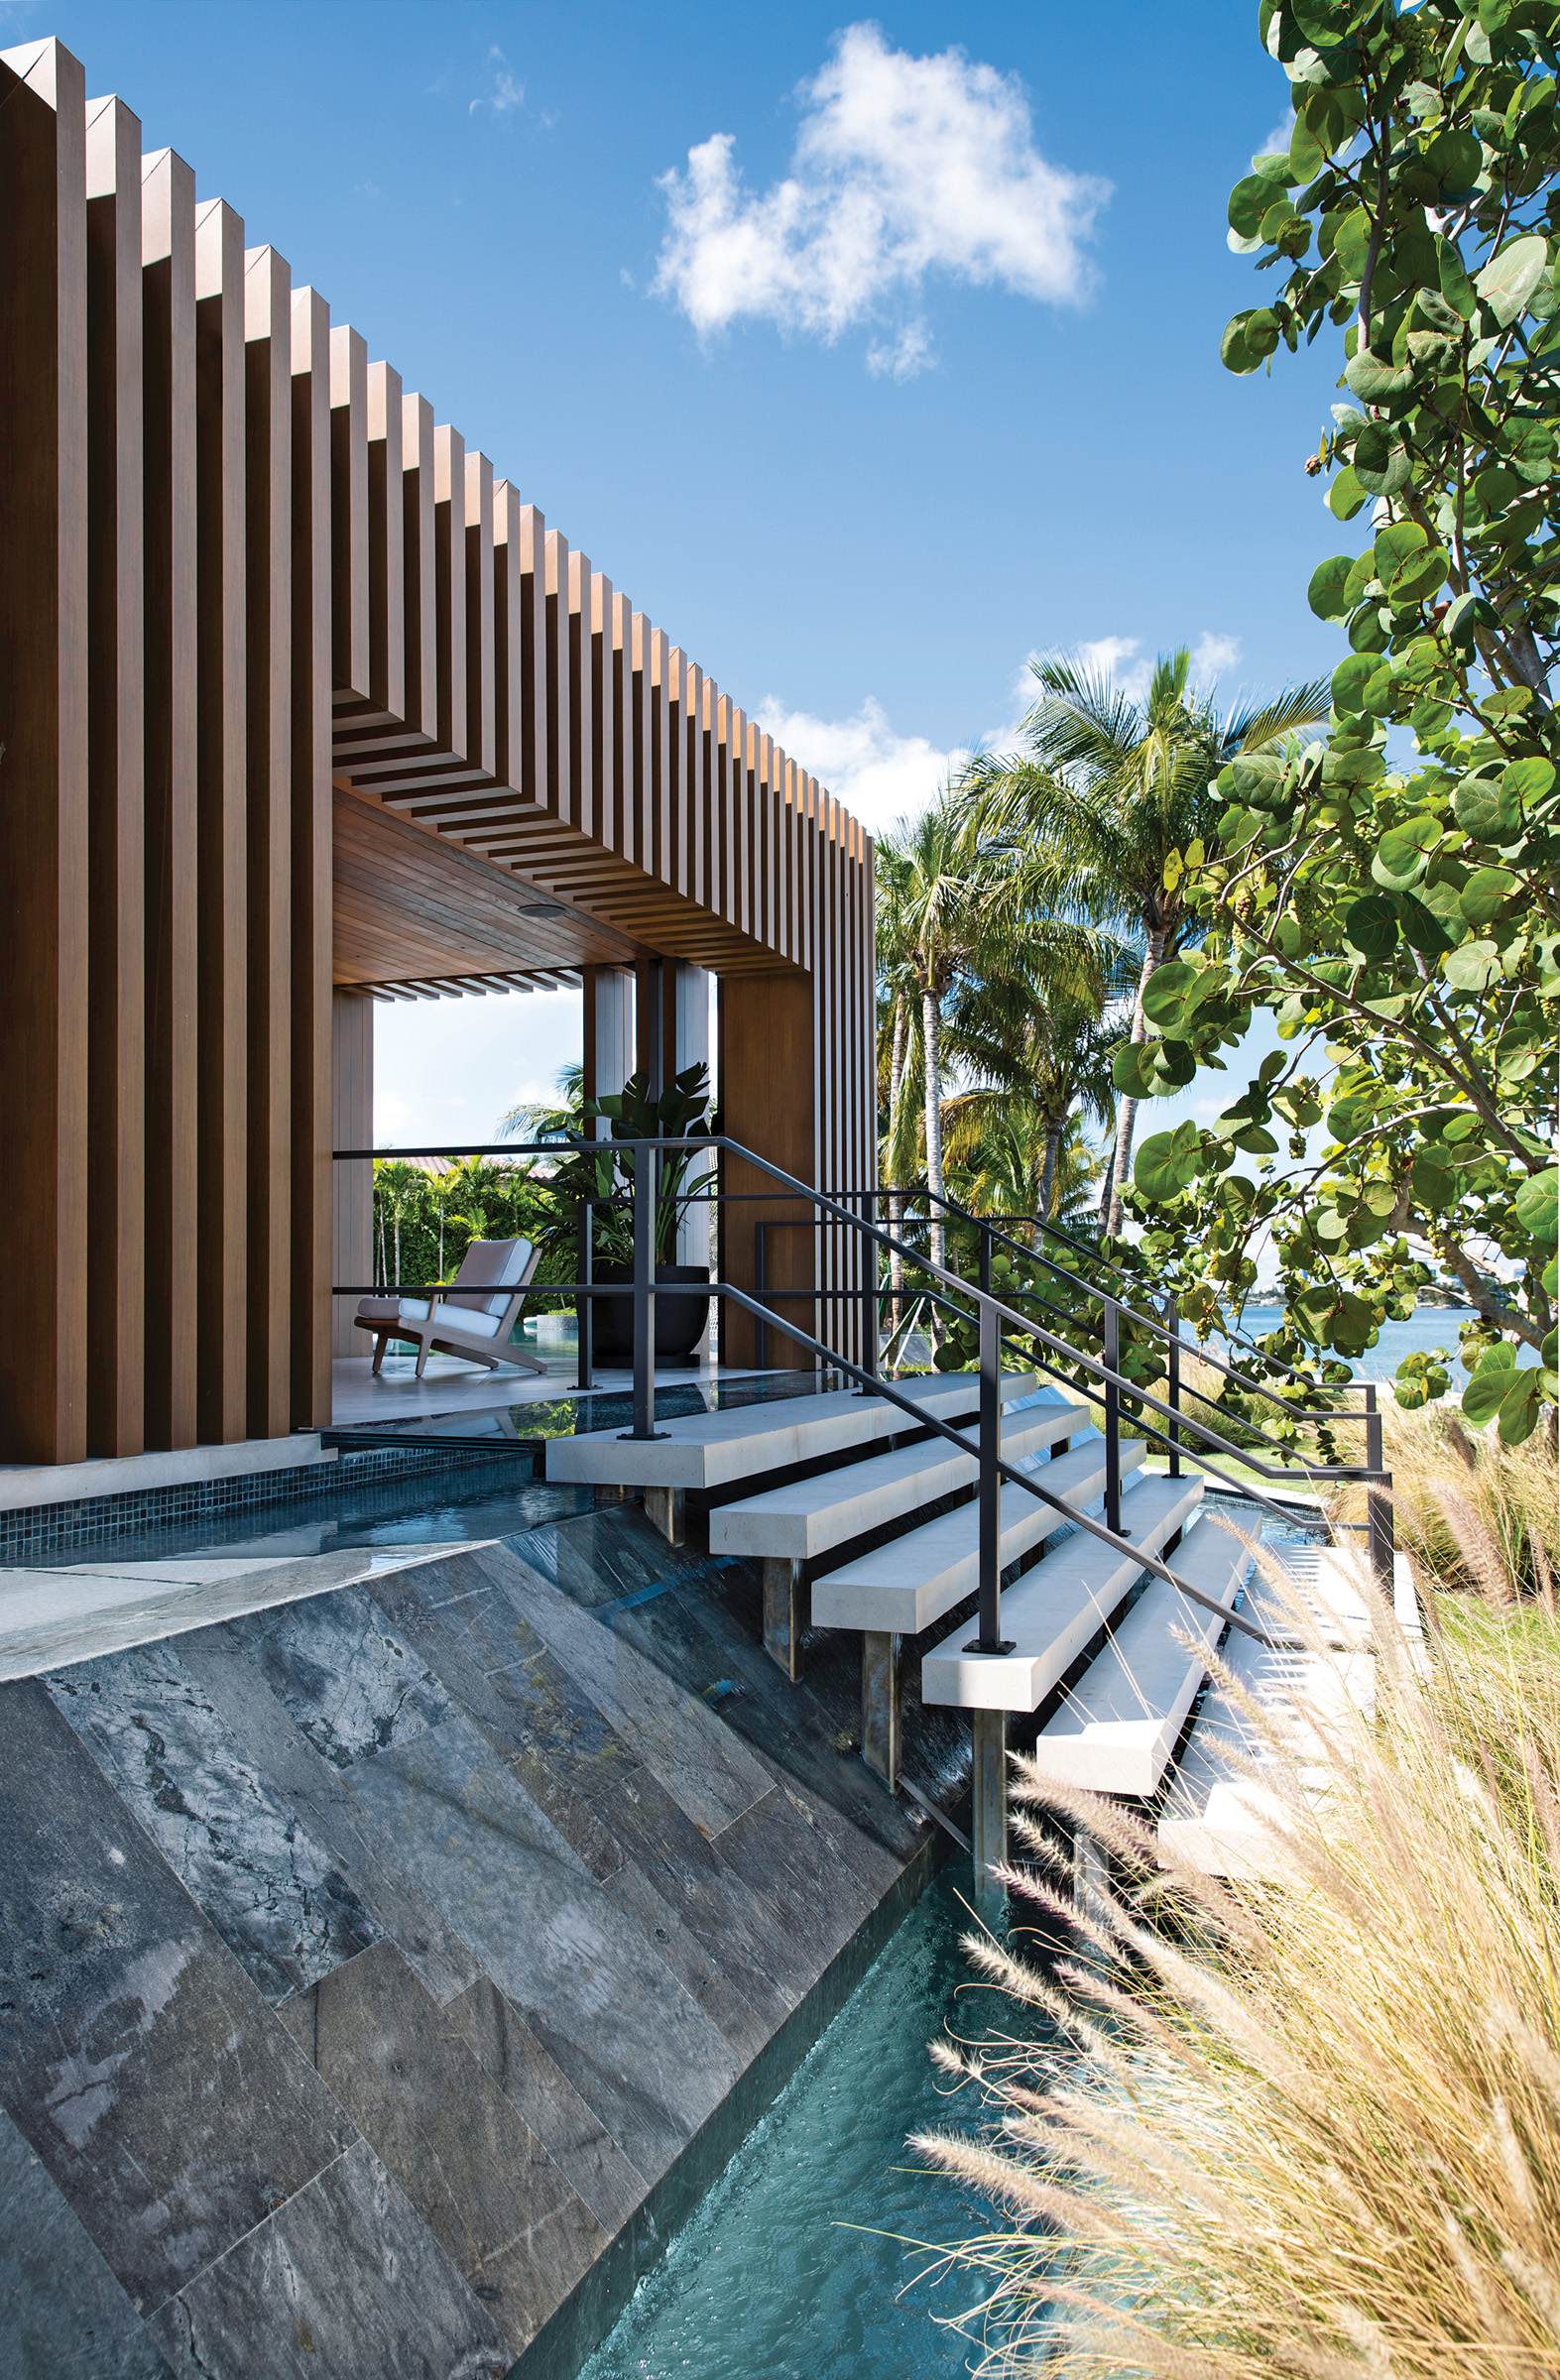 A set of stairs leads to a cabana surrounded by seagrape trees.